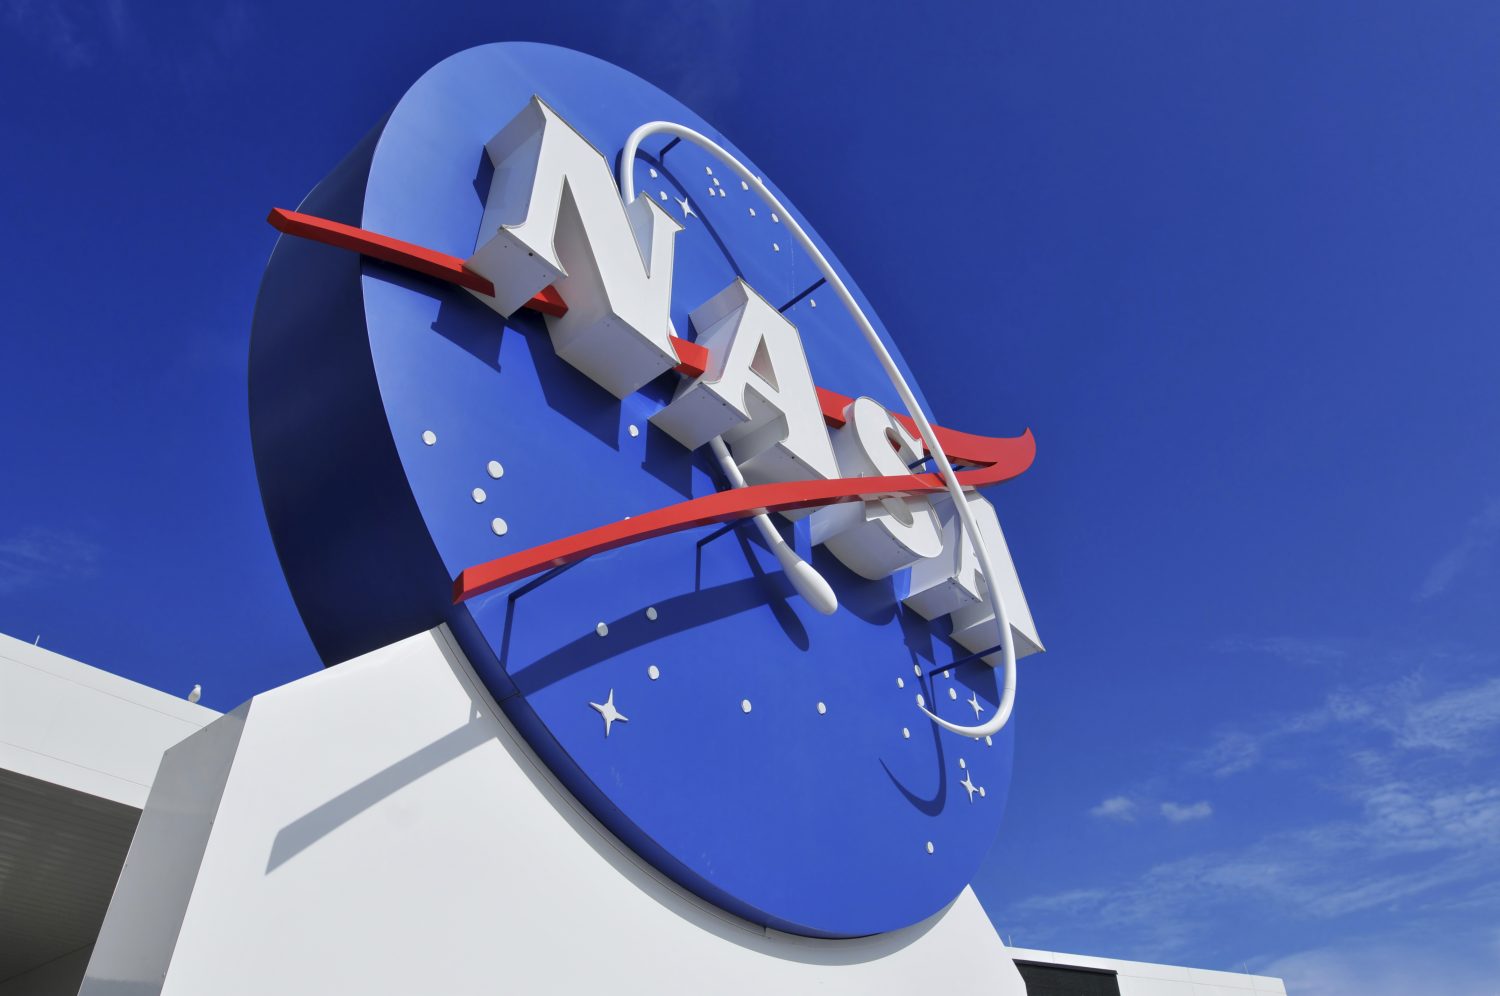 Pubspace: nasa gives public access to cutting edge science